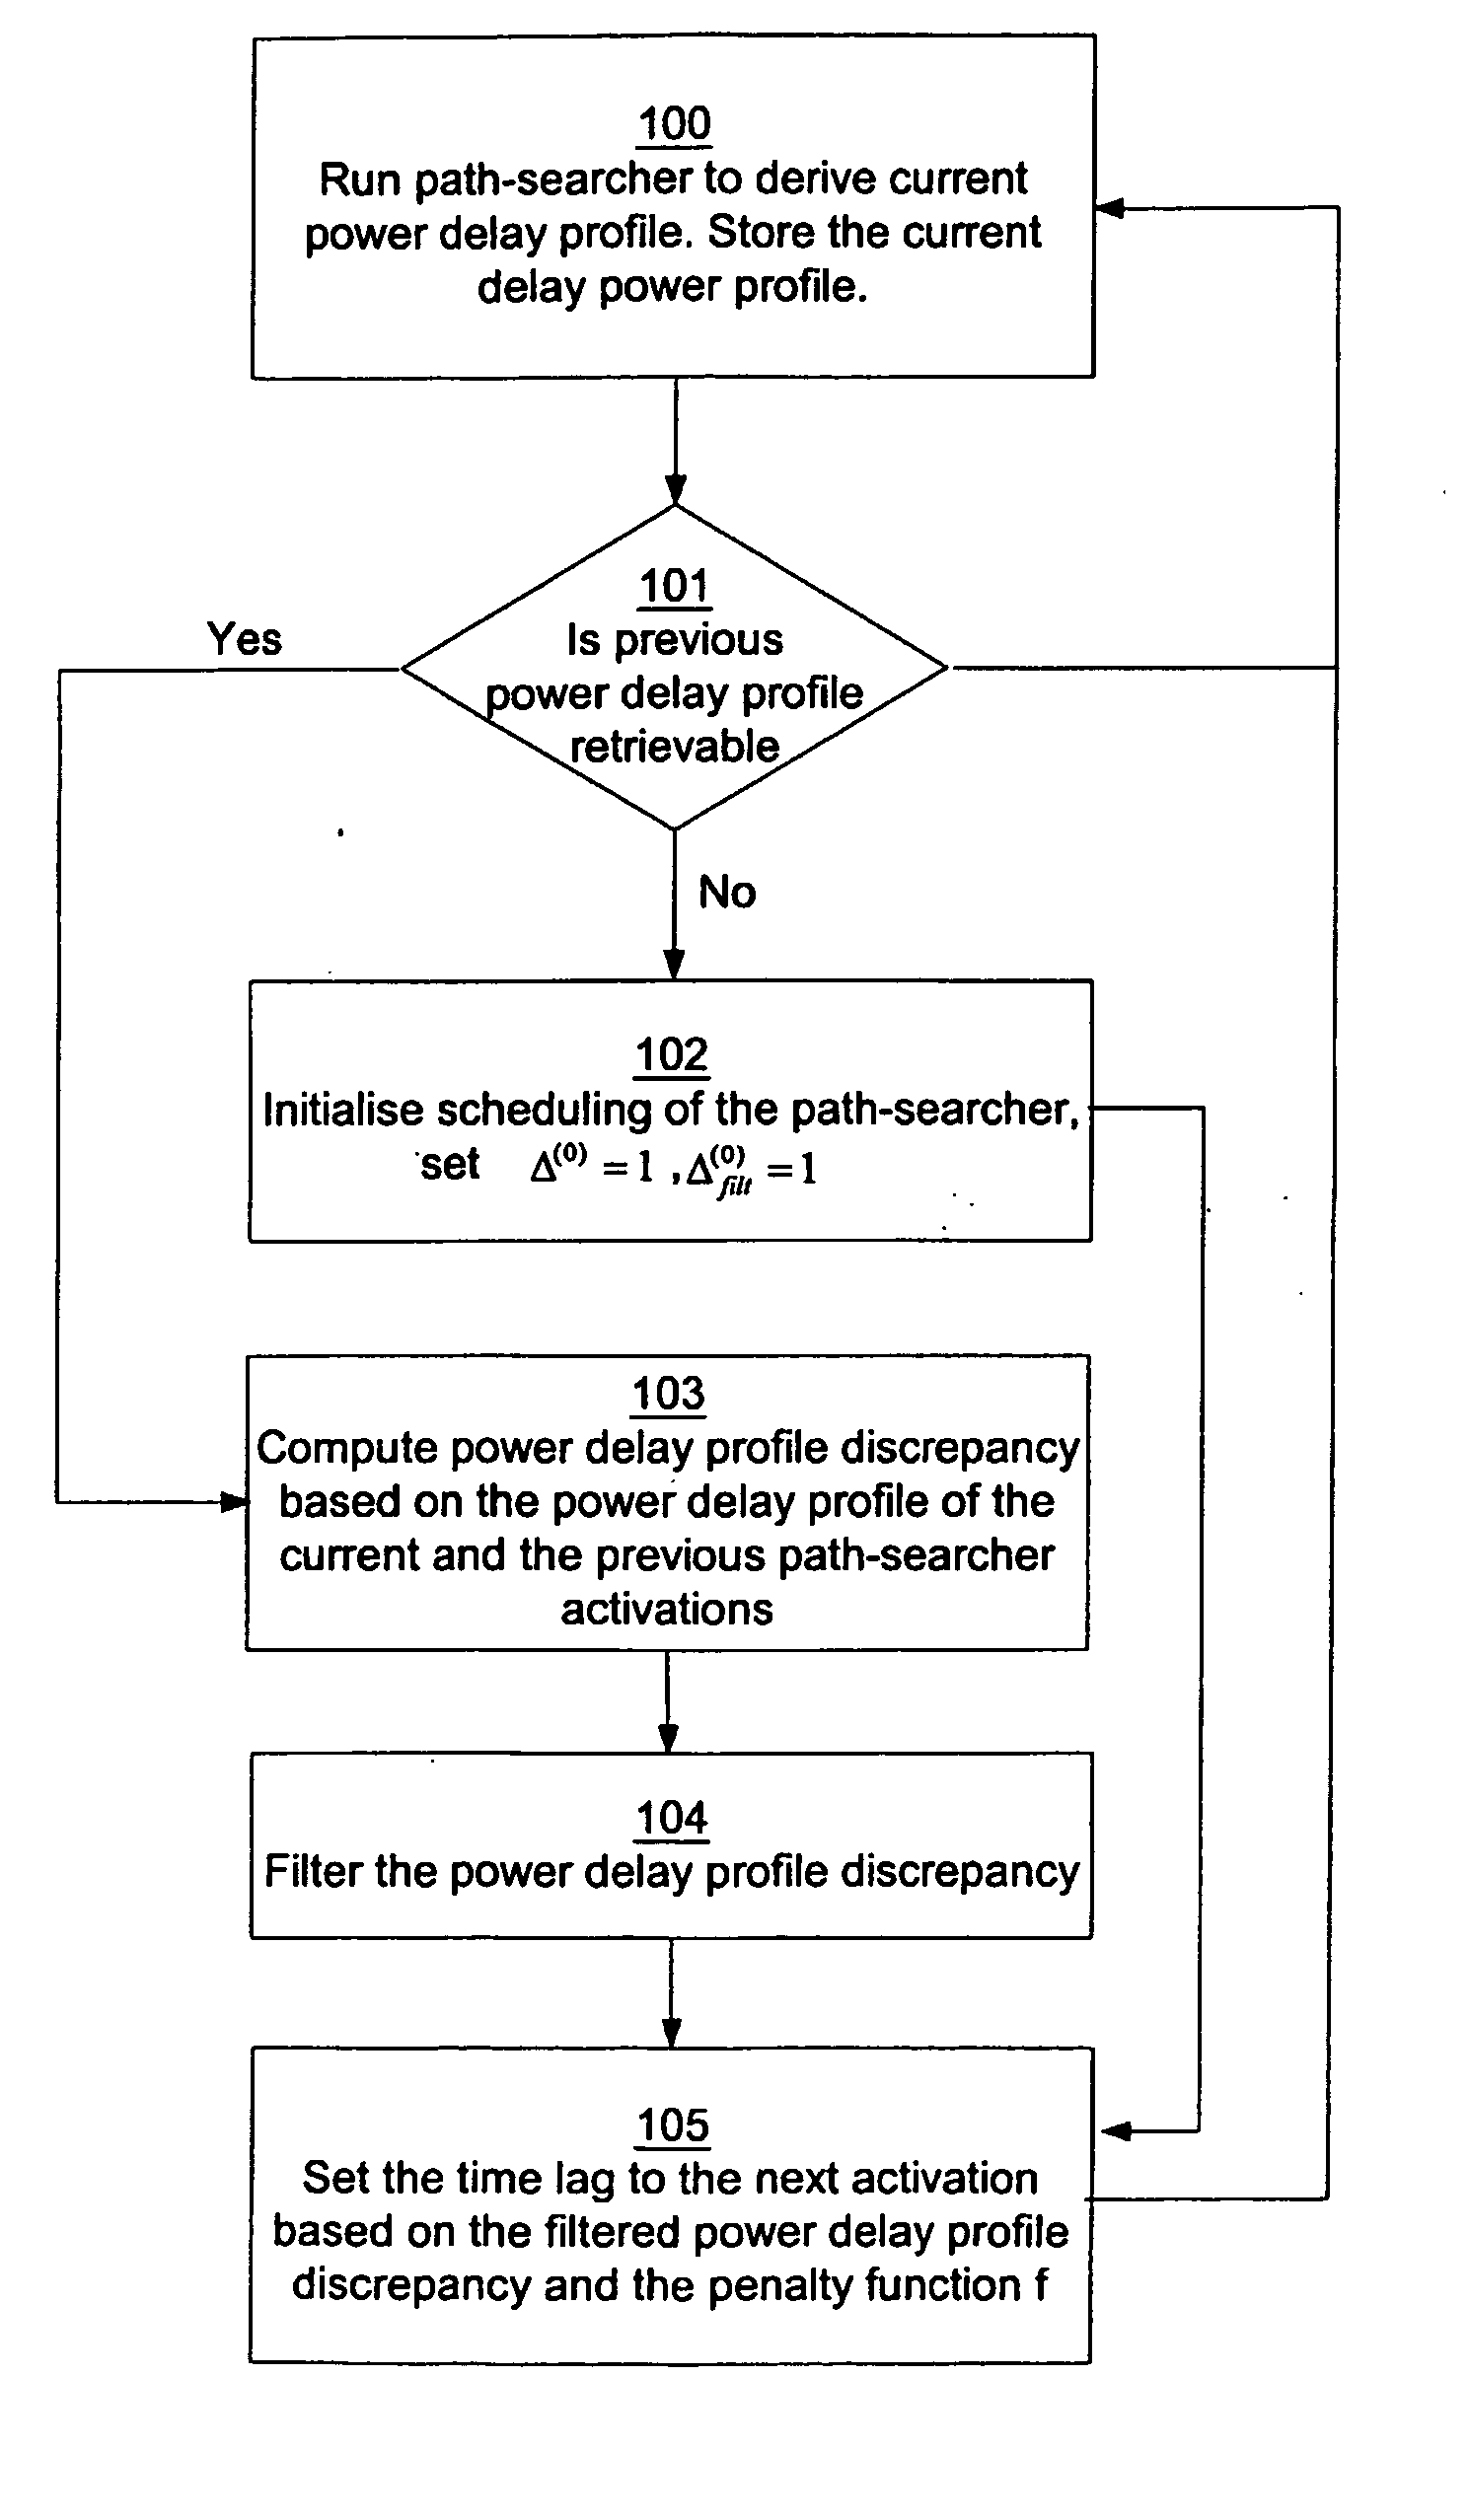 Method for path-seacher scheduling